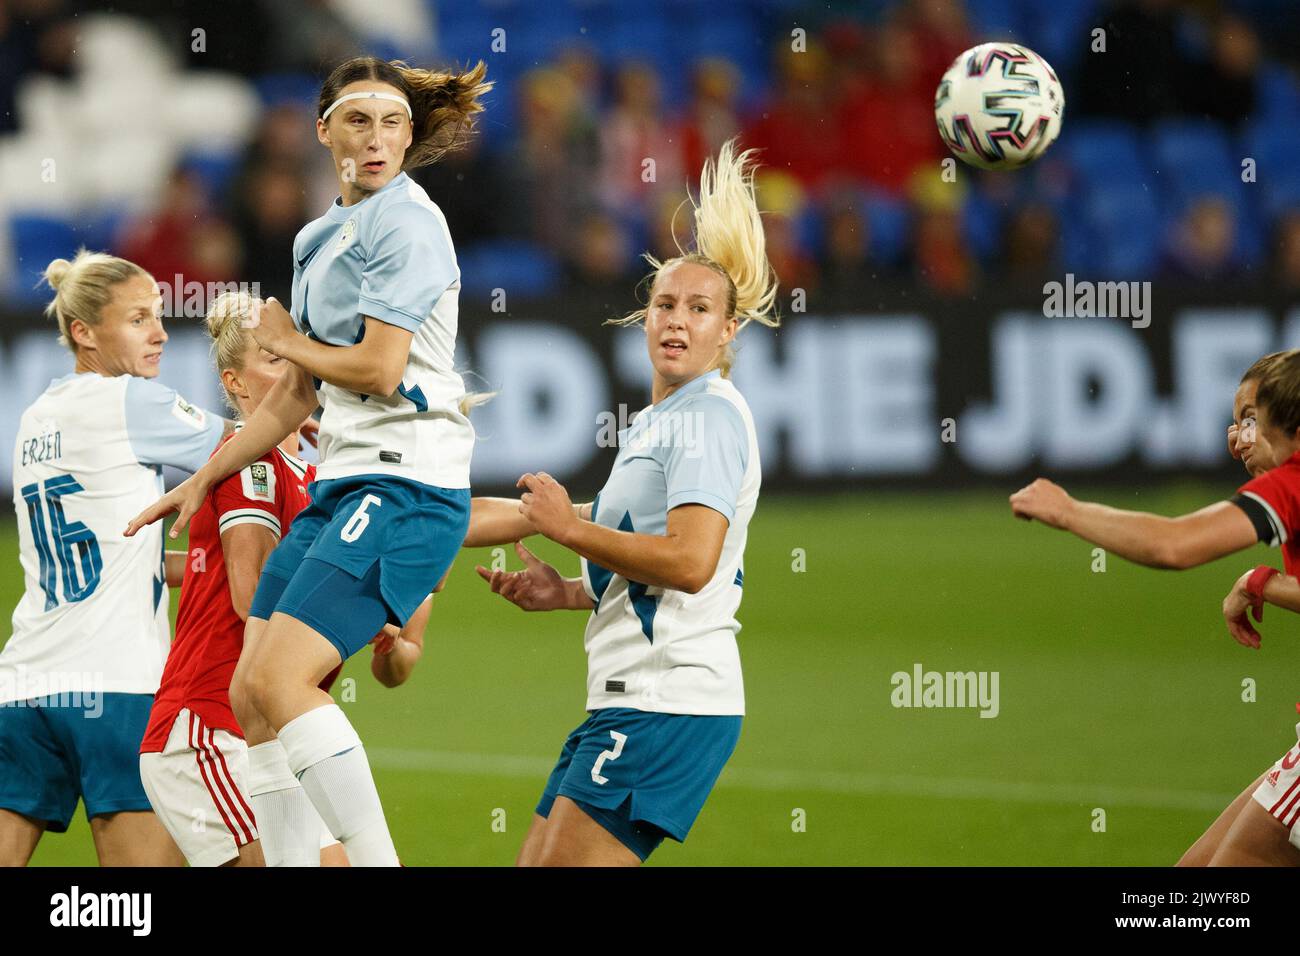 Cardiff, UK. 6th Sep, 2022. Kaja Korošec of Slovenia heads the ball during the Wales v Slovenia Women's World Cup Qualification match. Credit: Gruffydd Thomas/Alamy Live News Stock Photo